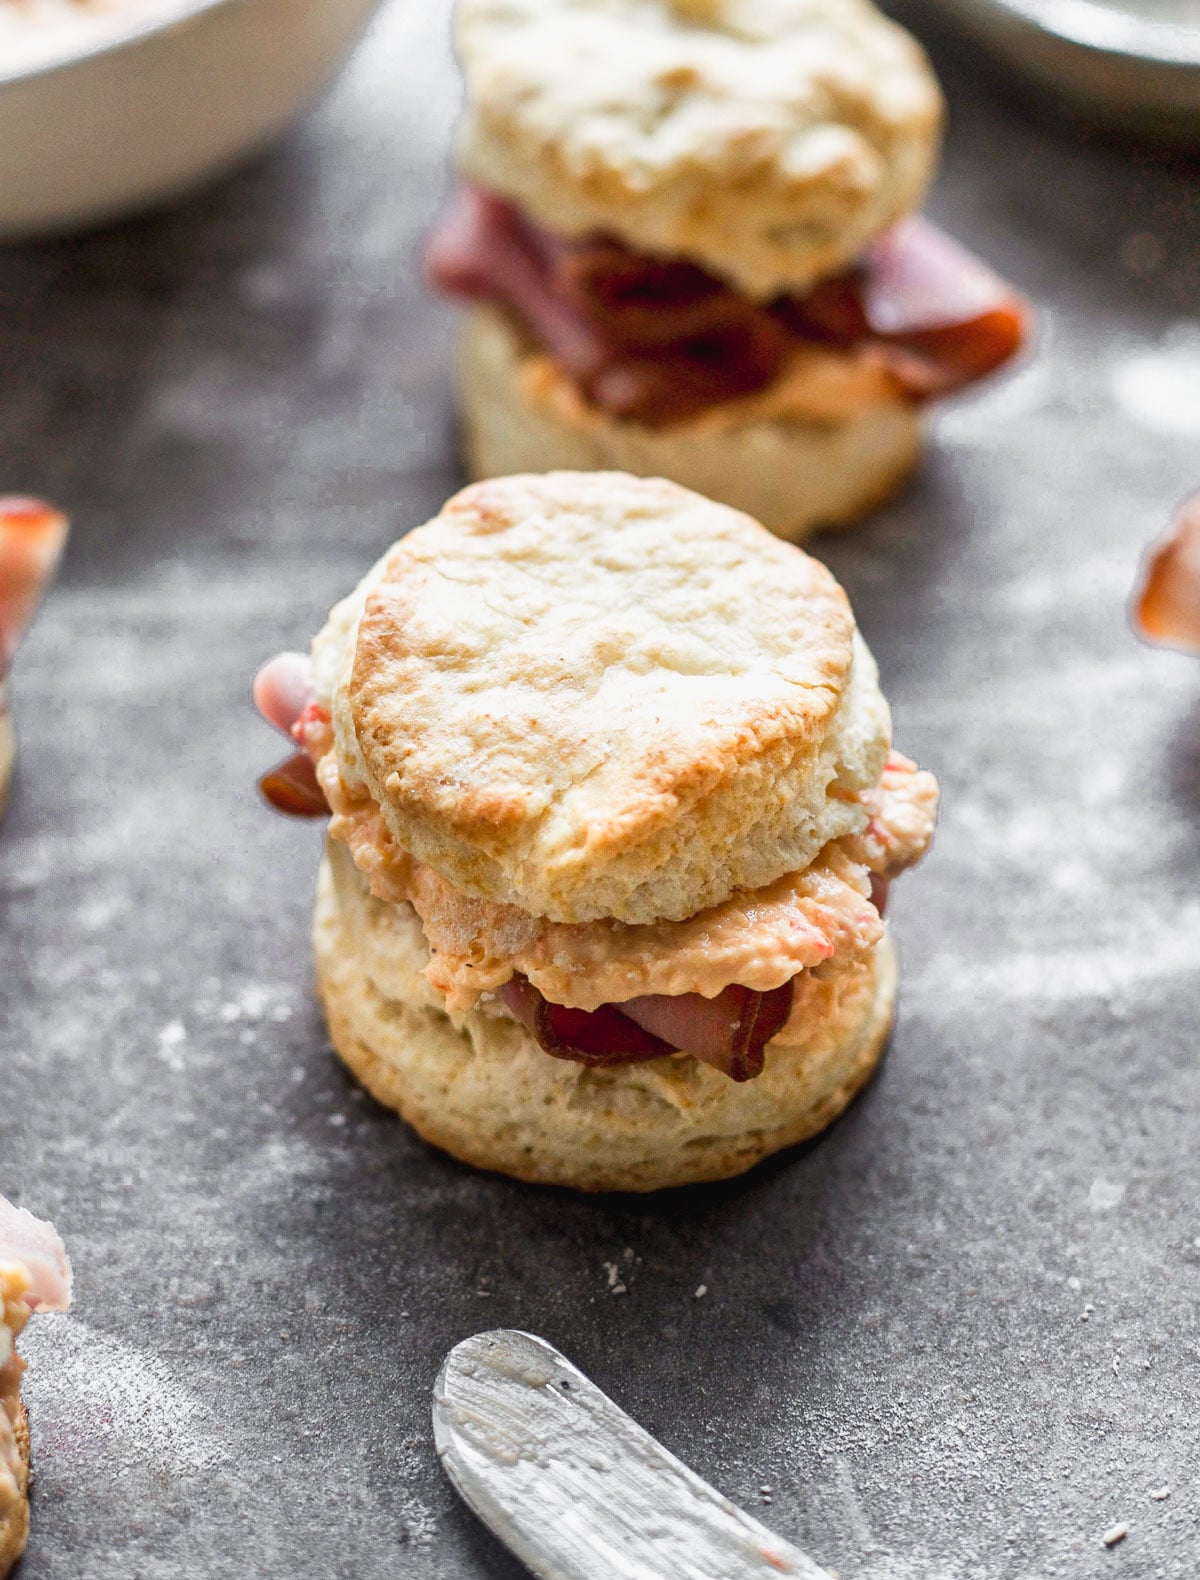 These Ham & Pimento Cheese Sandwiches are simple, but bursting with flavor. We take our favorite biscuit recipe that's light, flaky, and oh-so delicious and smother the inside with warm pimento cheese and ham. The perfect bridal shower, lunch or side to soup or salad.